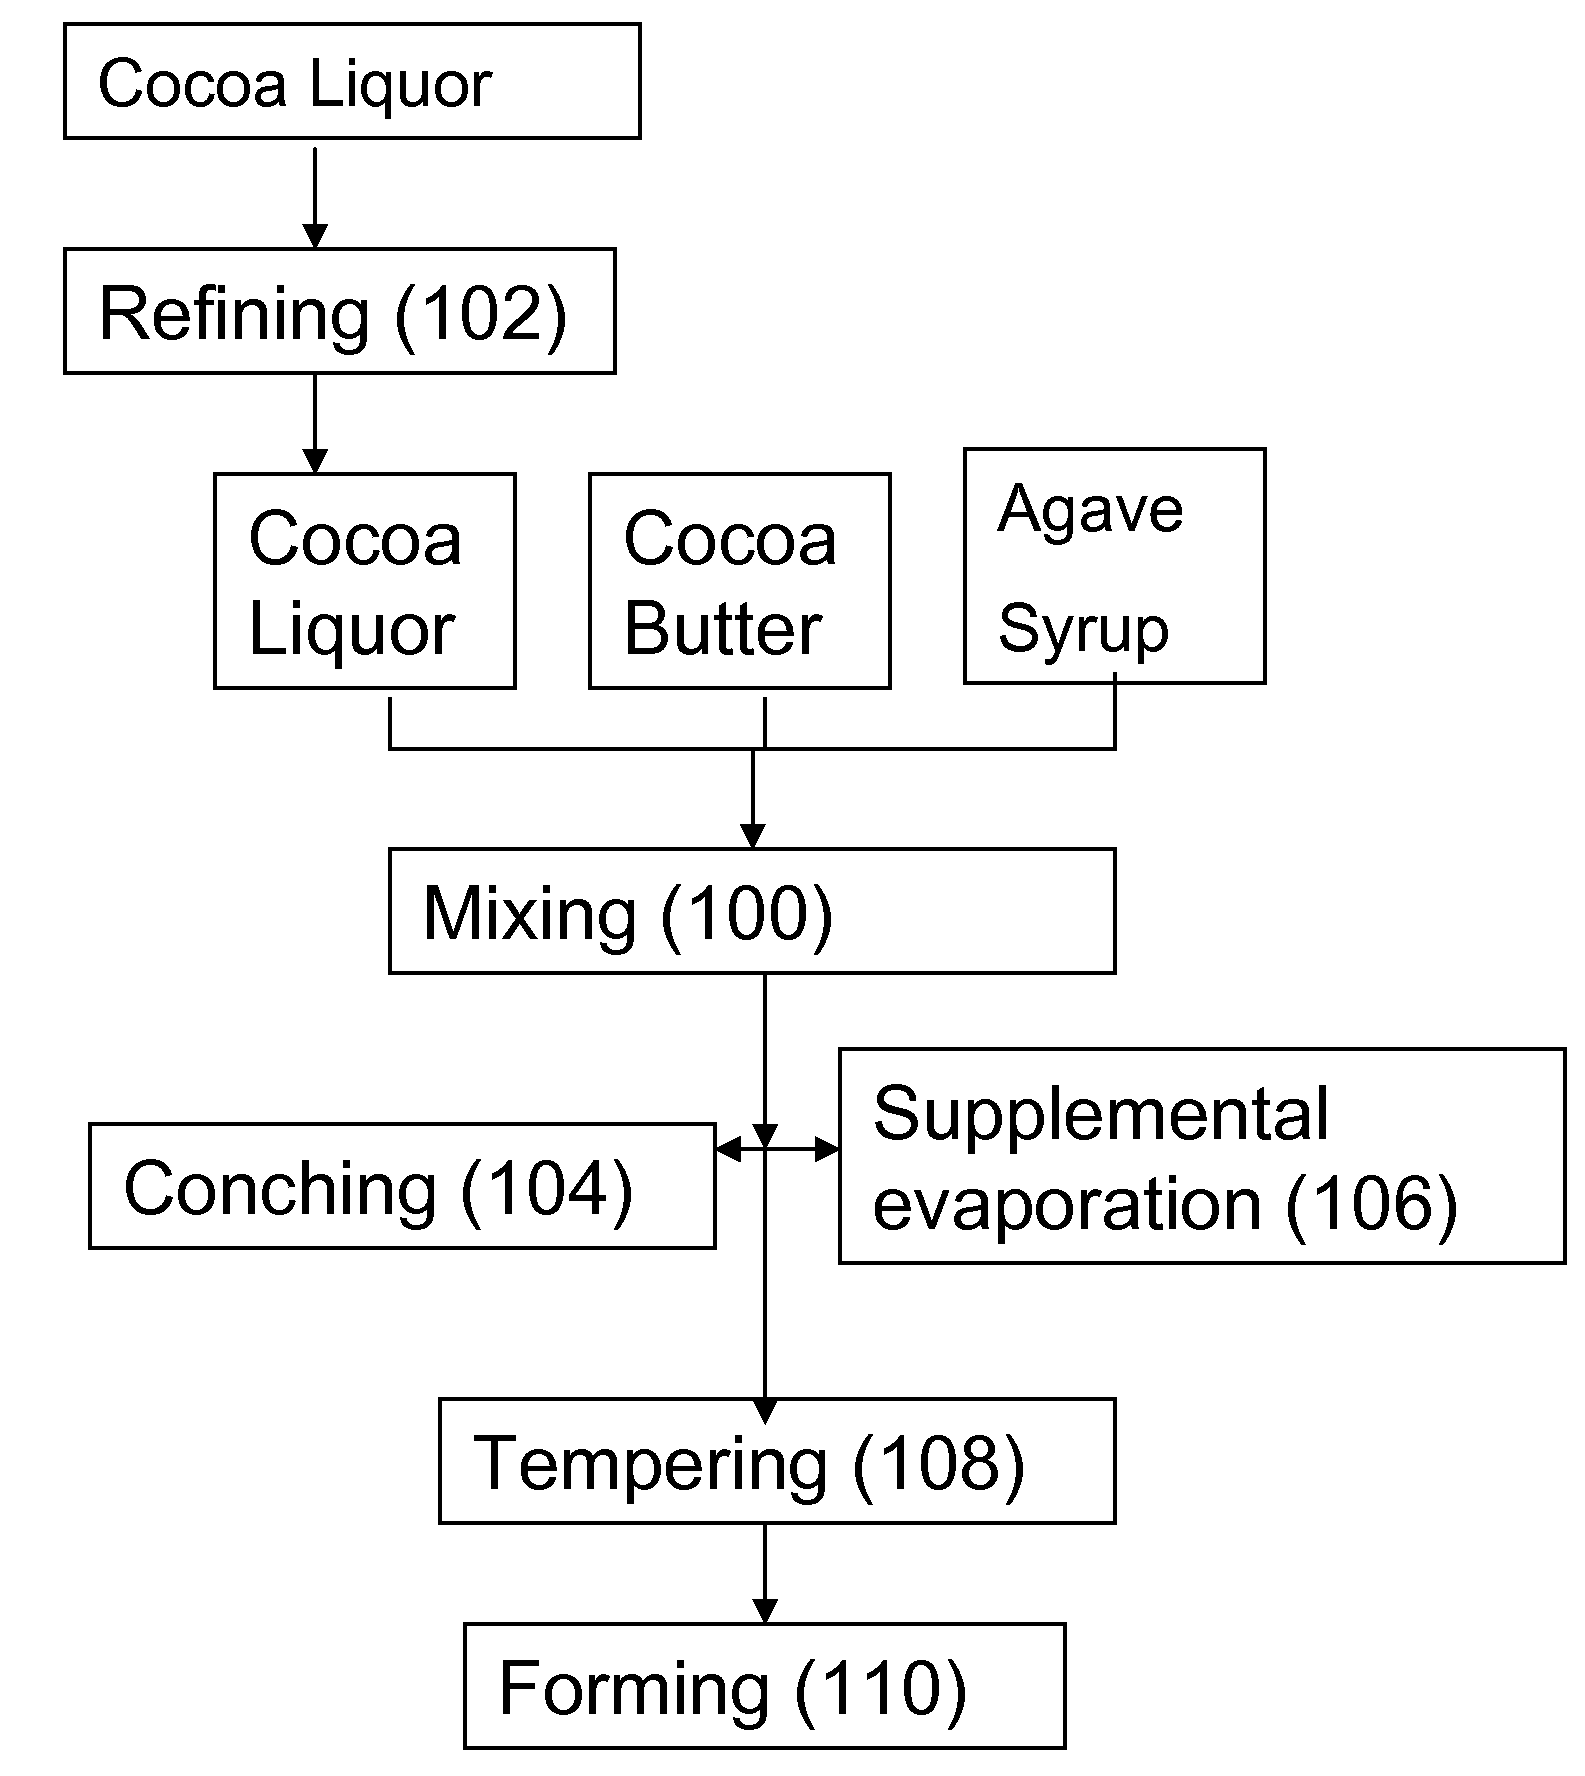 Sugar free and reduced sugar chocolate and methods of manufacture